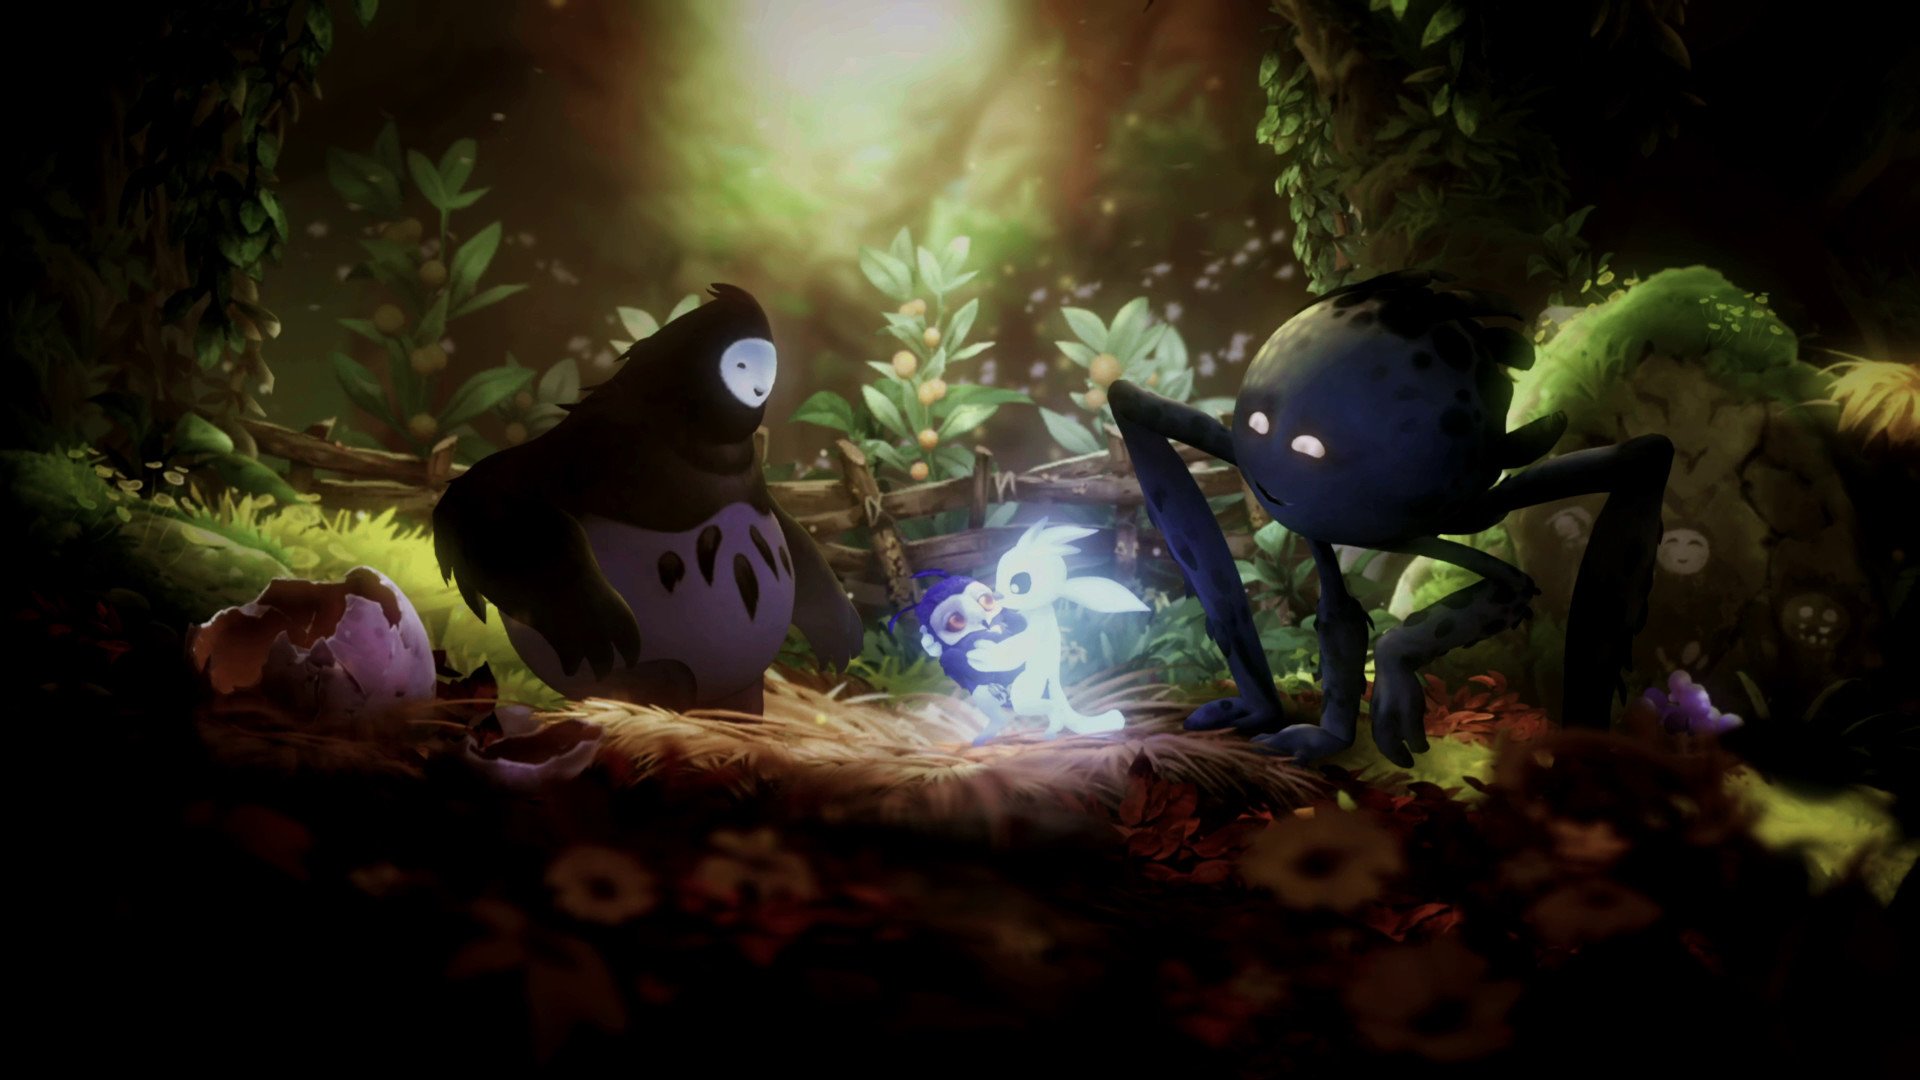 ori-and-the-will-of-the-wisps-review-screens_1.jpg